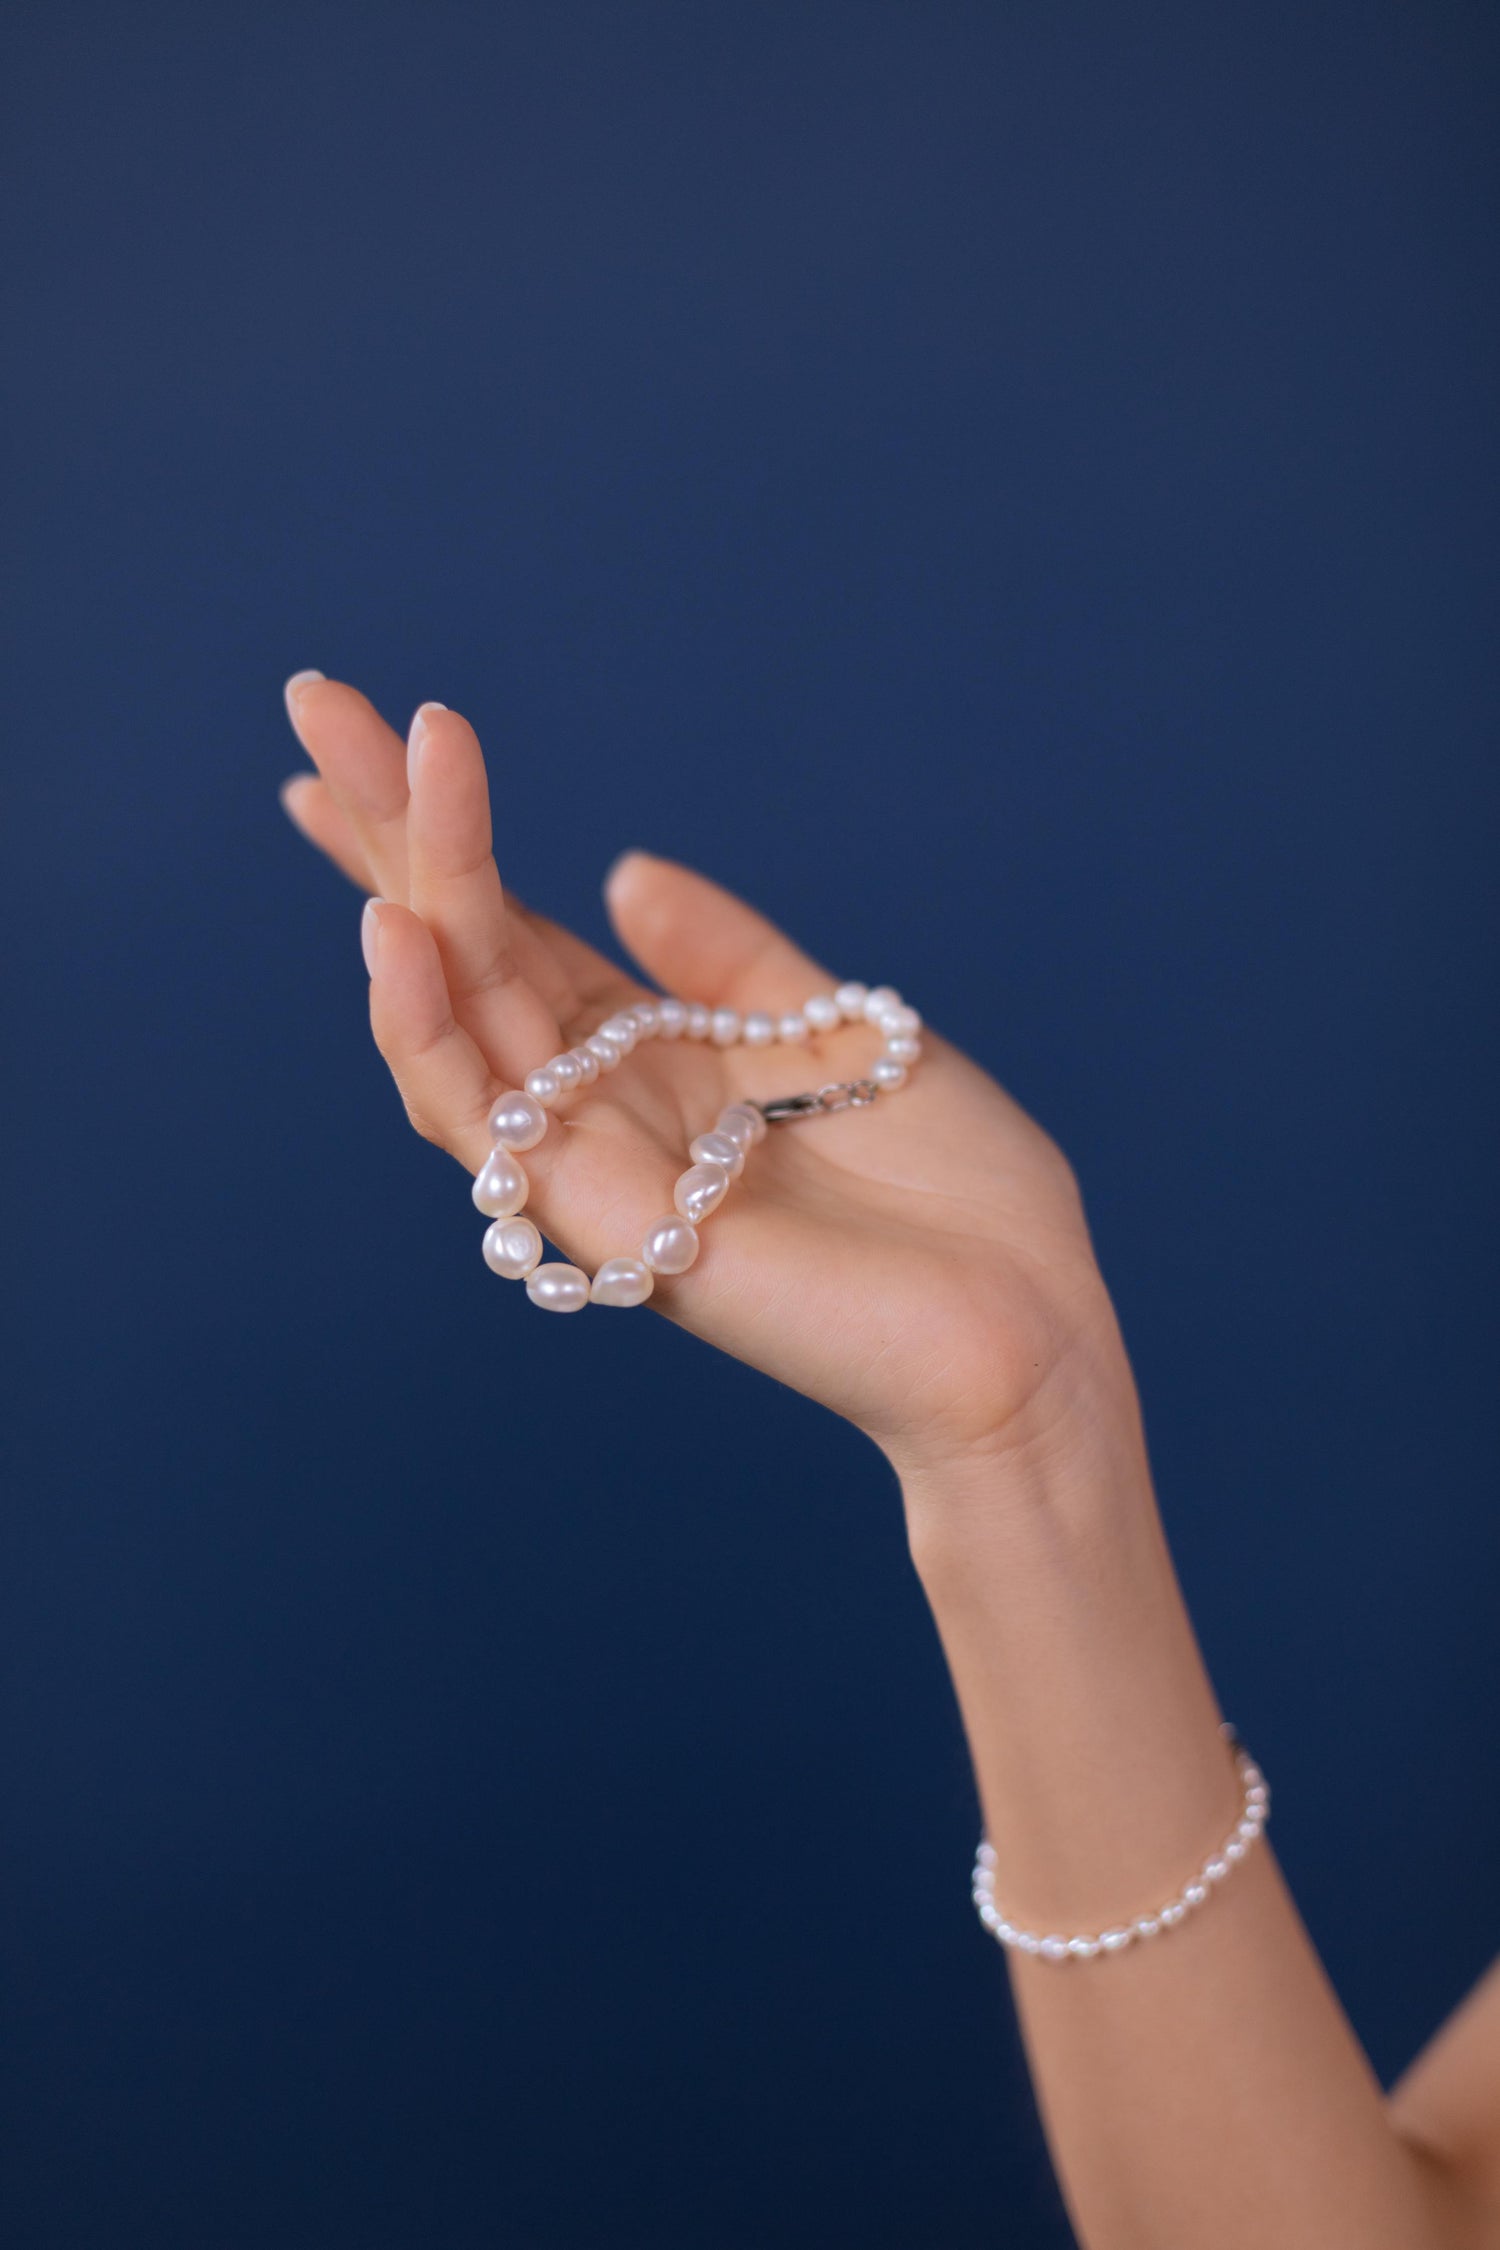 Hand holding a pearl bracelet